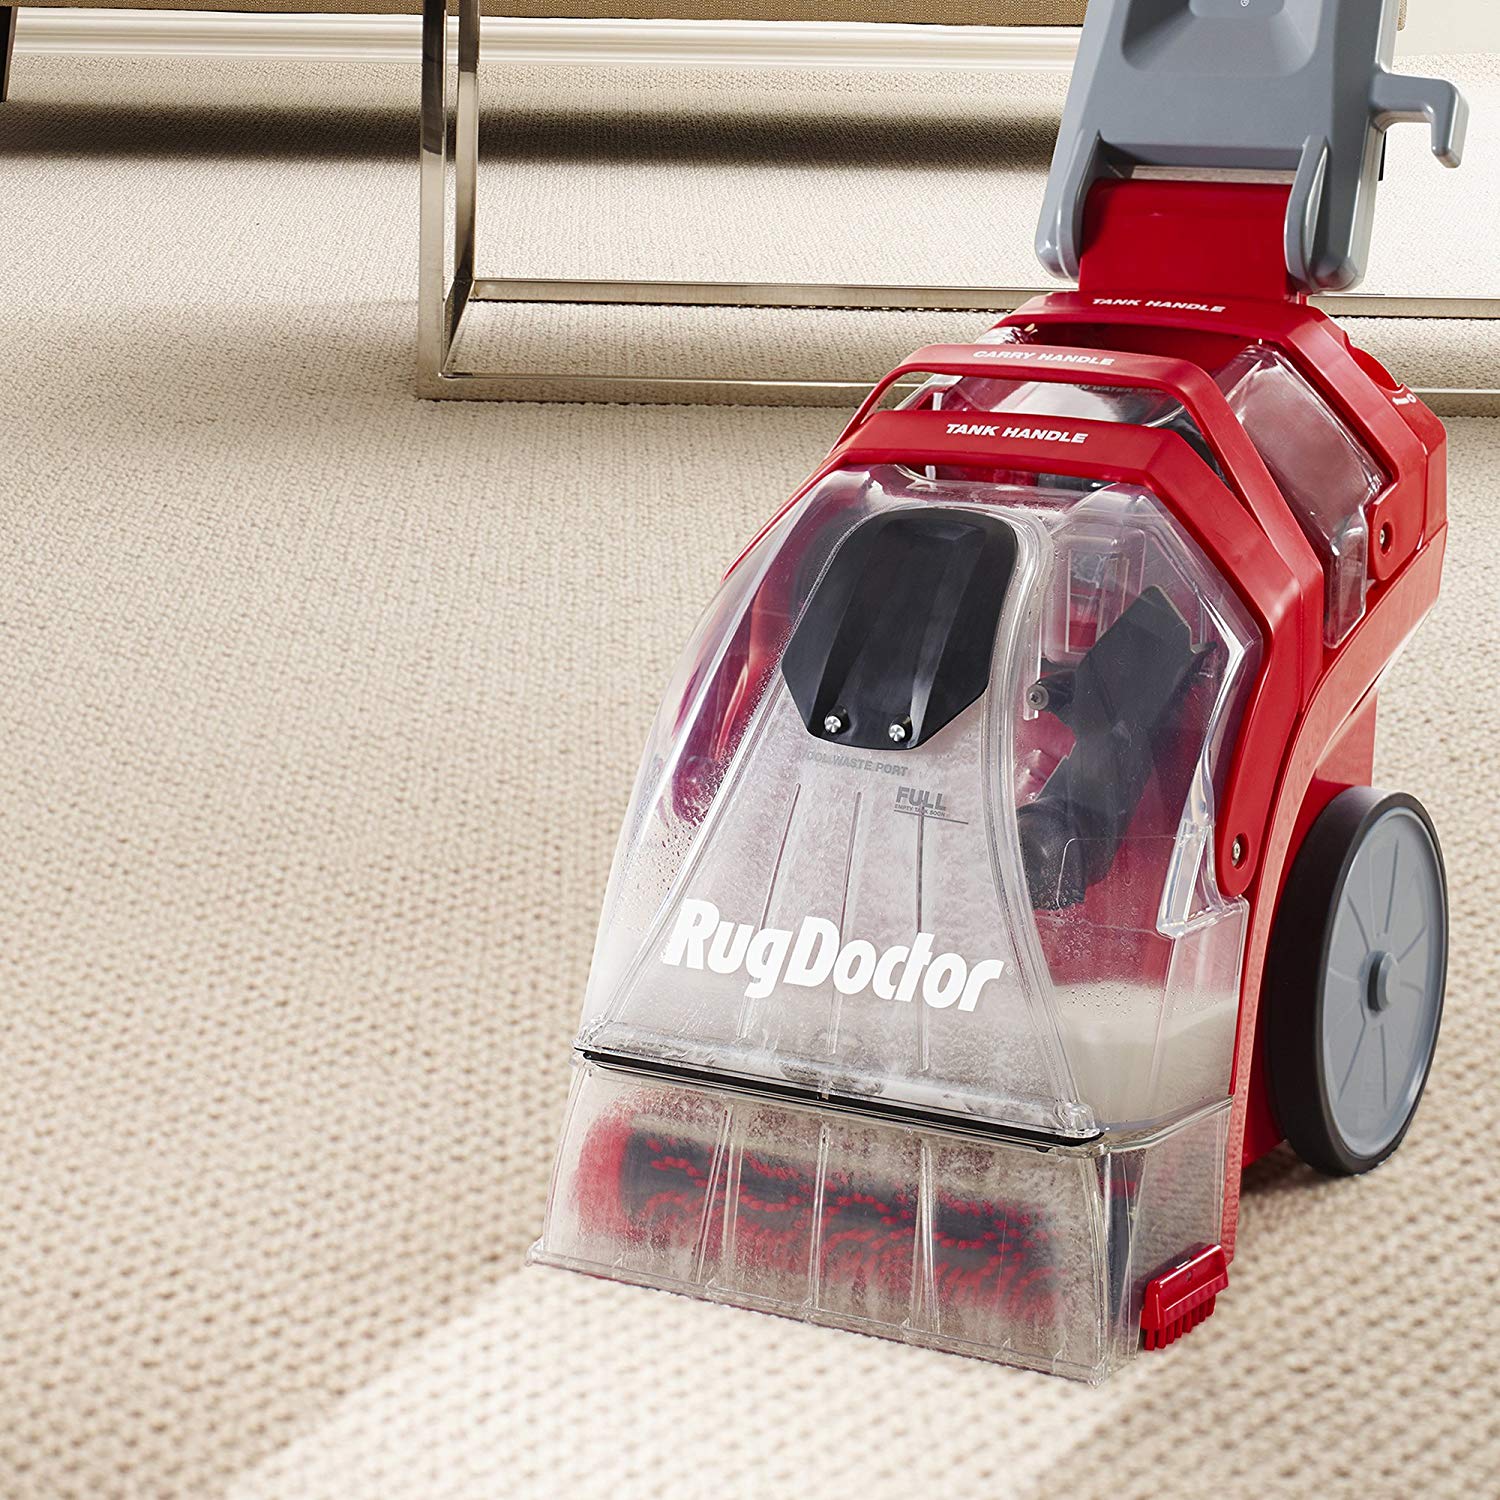 Rug-Doctor-Deep-Carpet-Cleaner-Upright-Portable-Deep-Cleaning-Washer